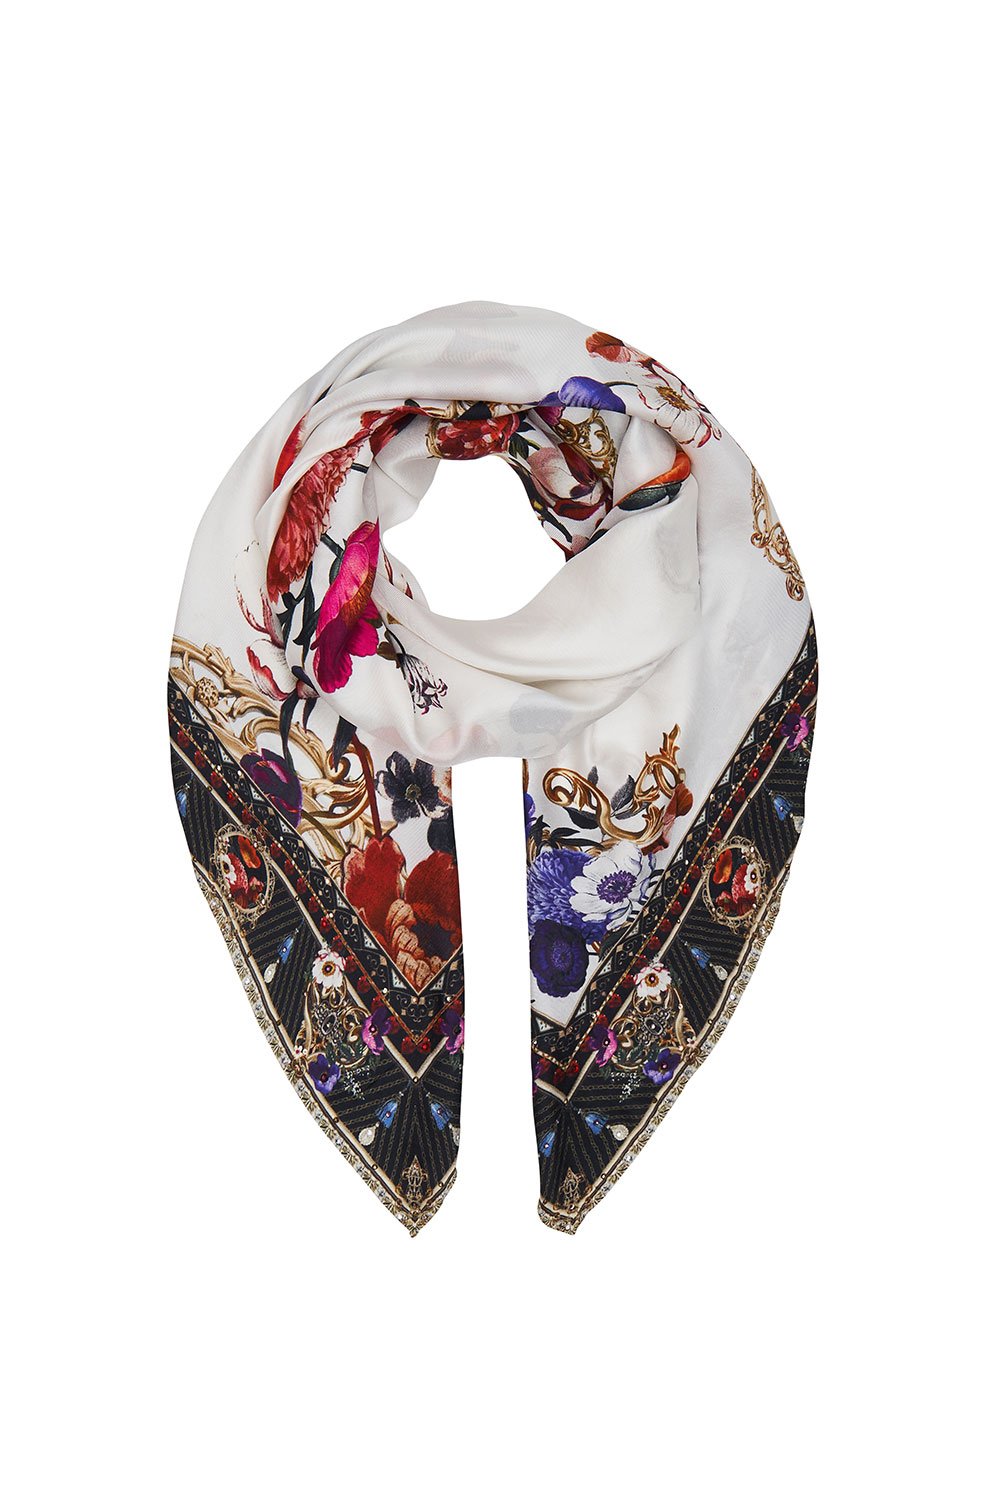 LARGE SQUARE SCARF FAIRY GODMOTHER